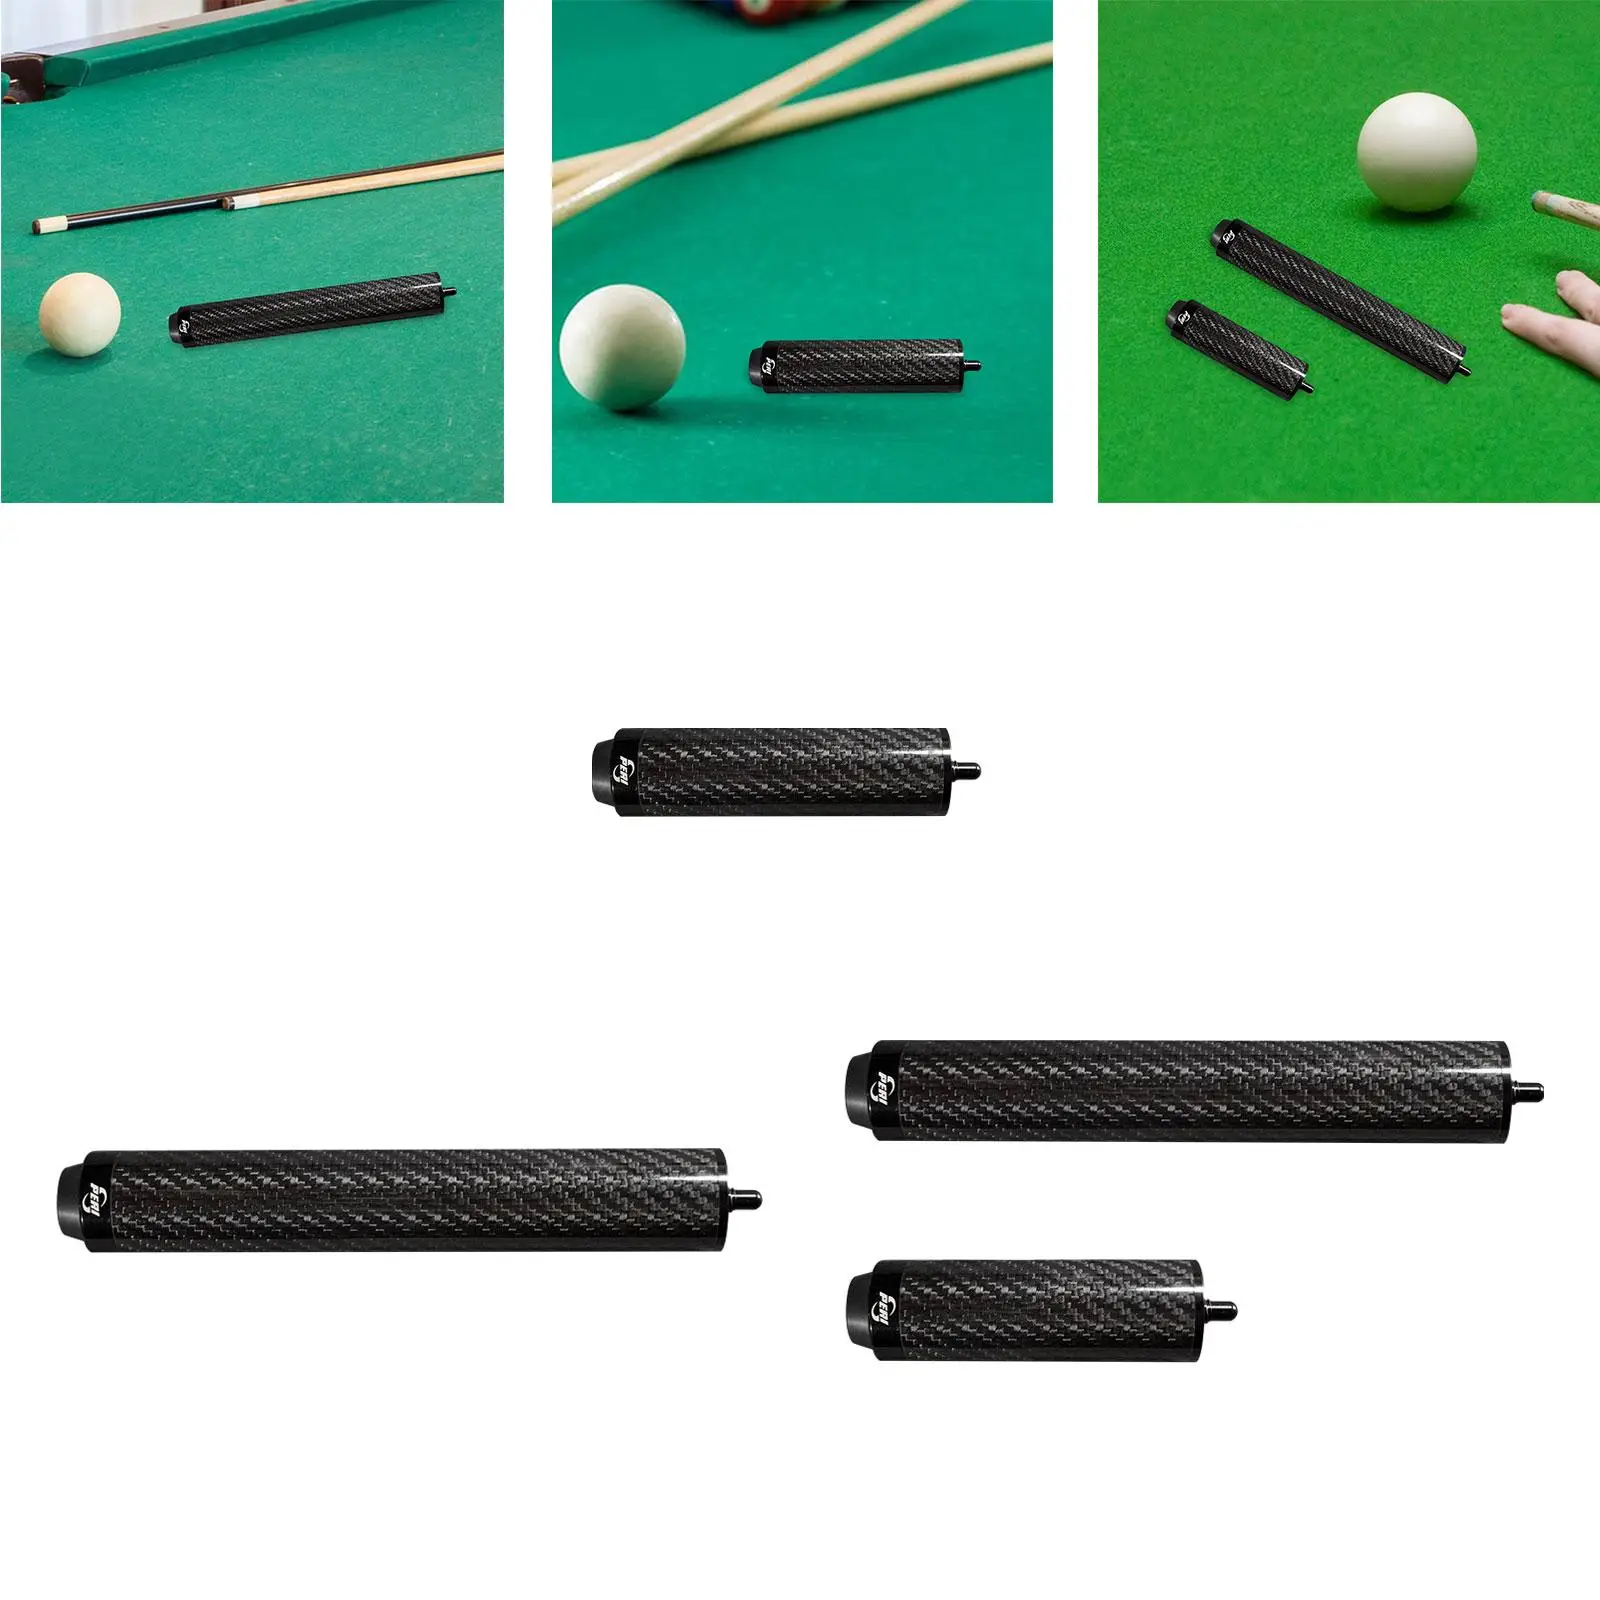 Cue Rod Extension, Billiards Pool Cue Extension, Cue Joint Accessories Black Billiard Connect Shaft for Athlete, Beginners